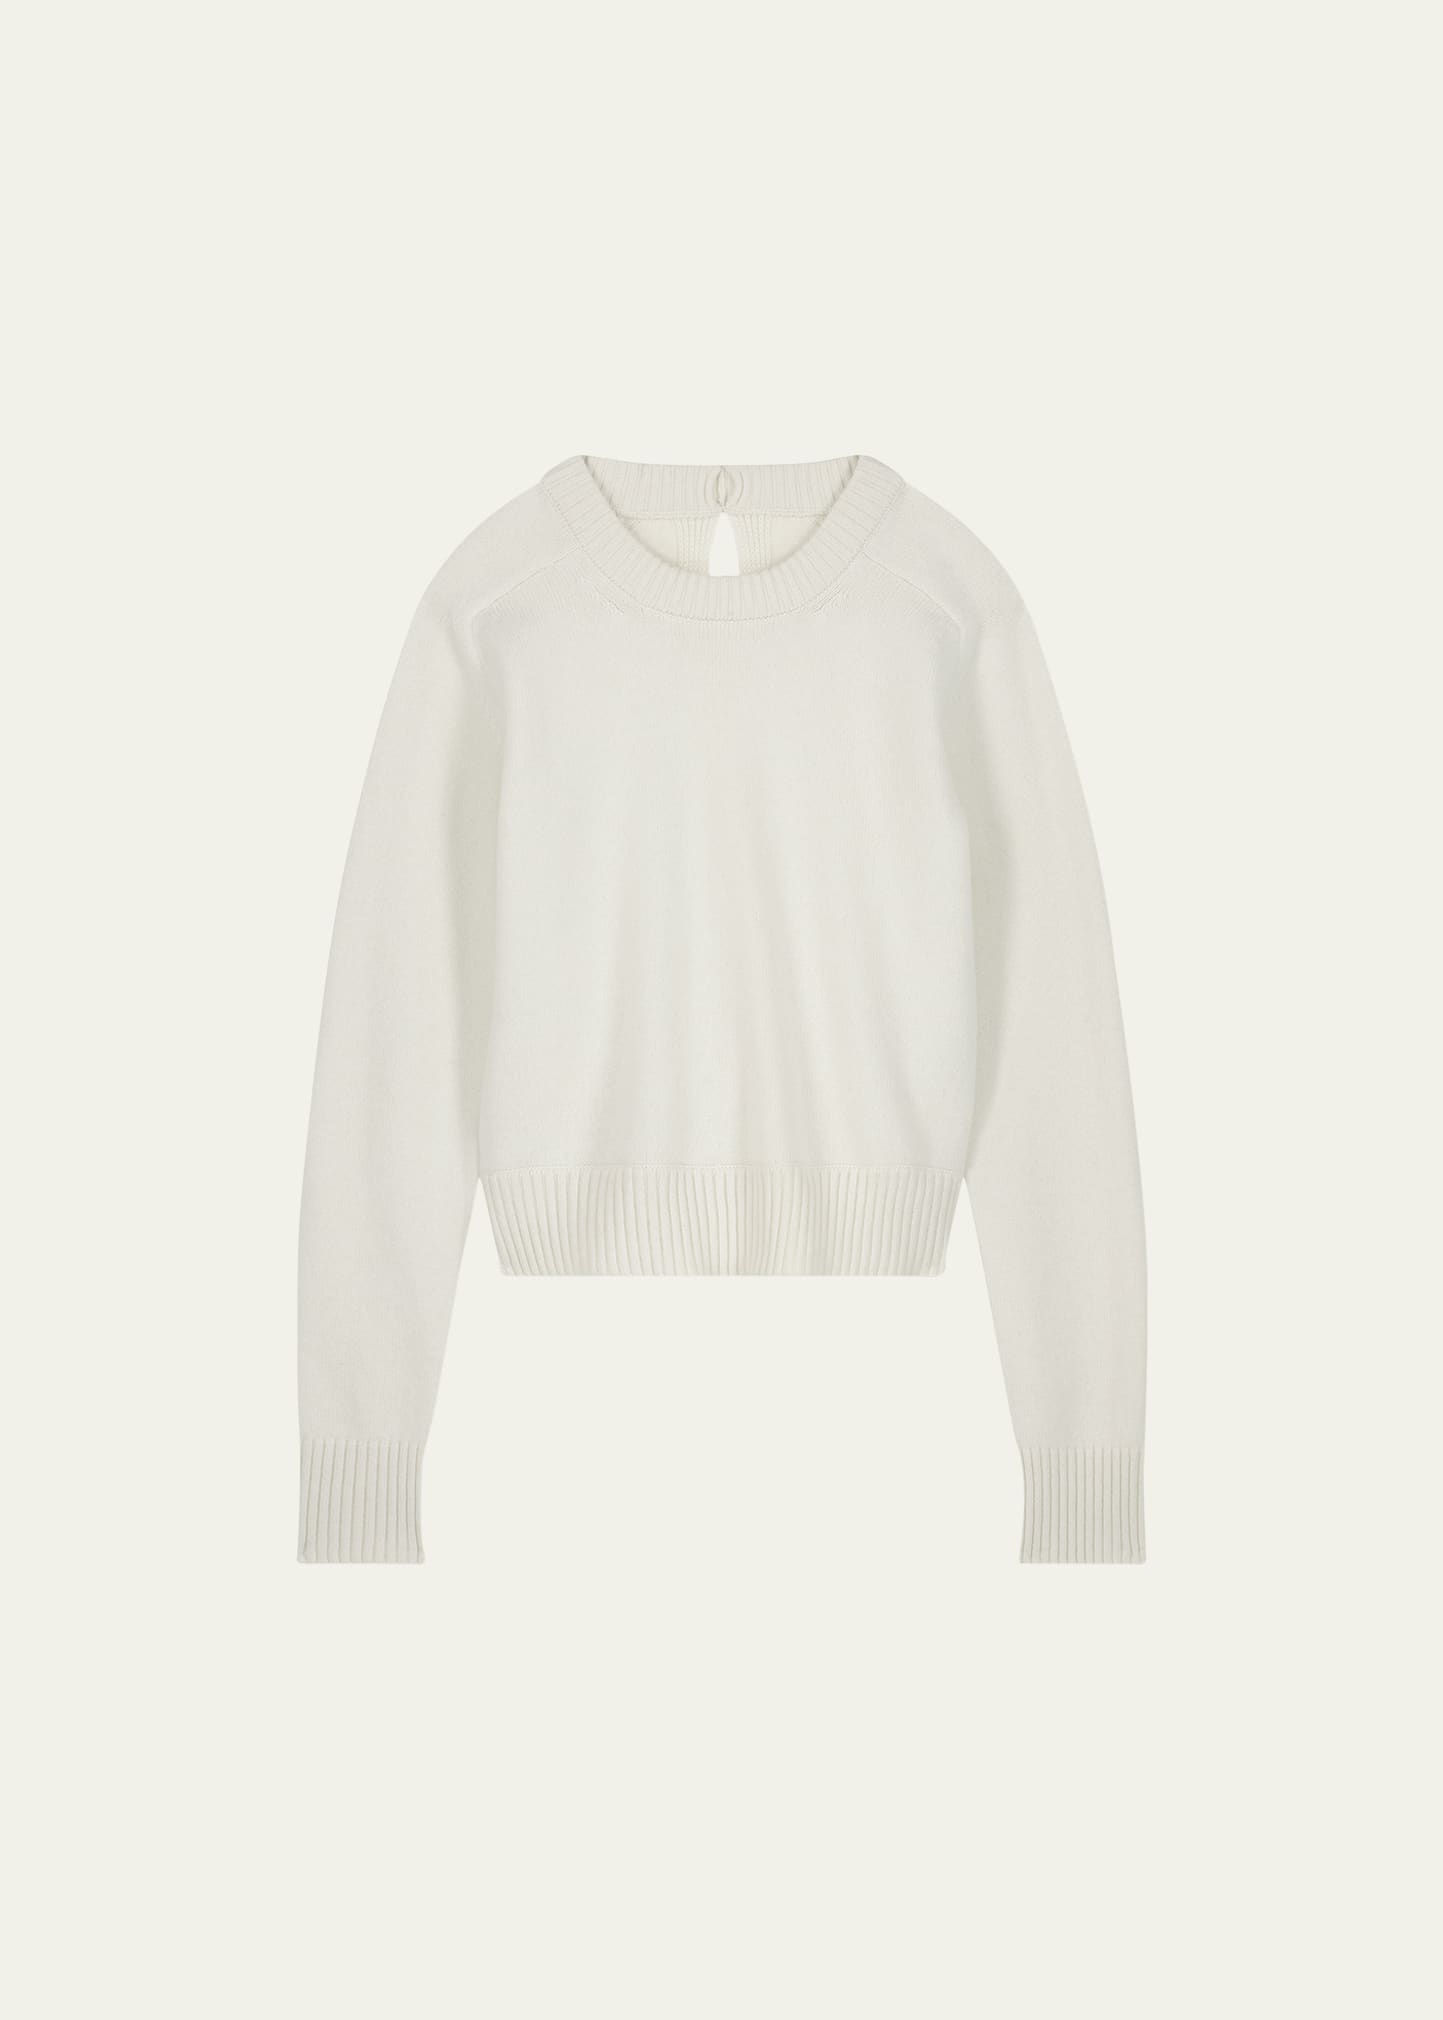 Shang Xia Open-back Wool Cashmere Sweater In Magnolia